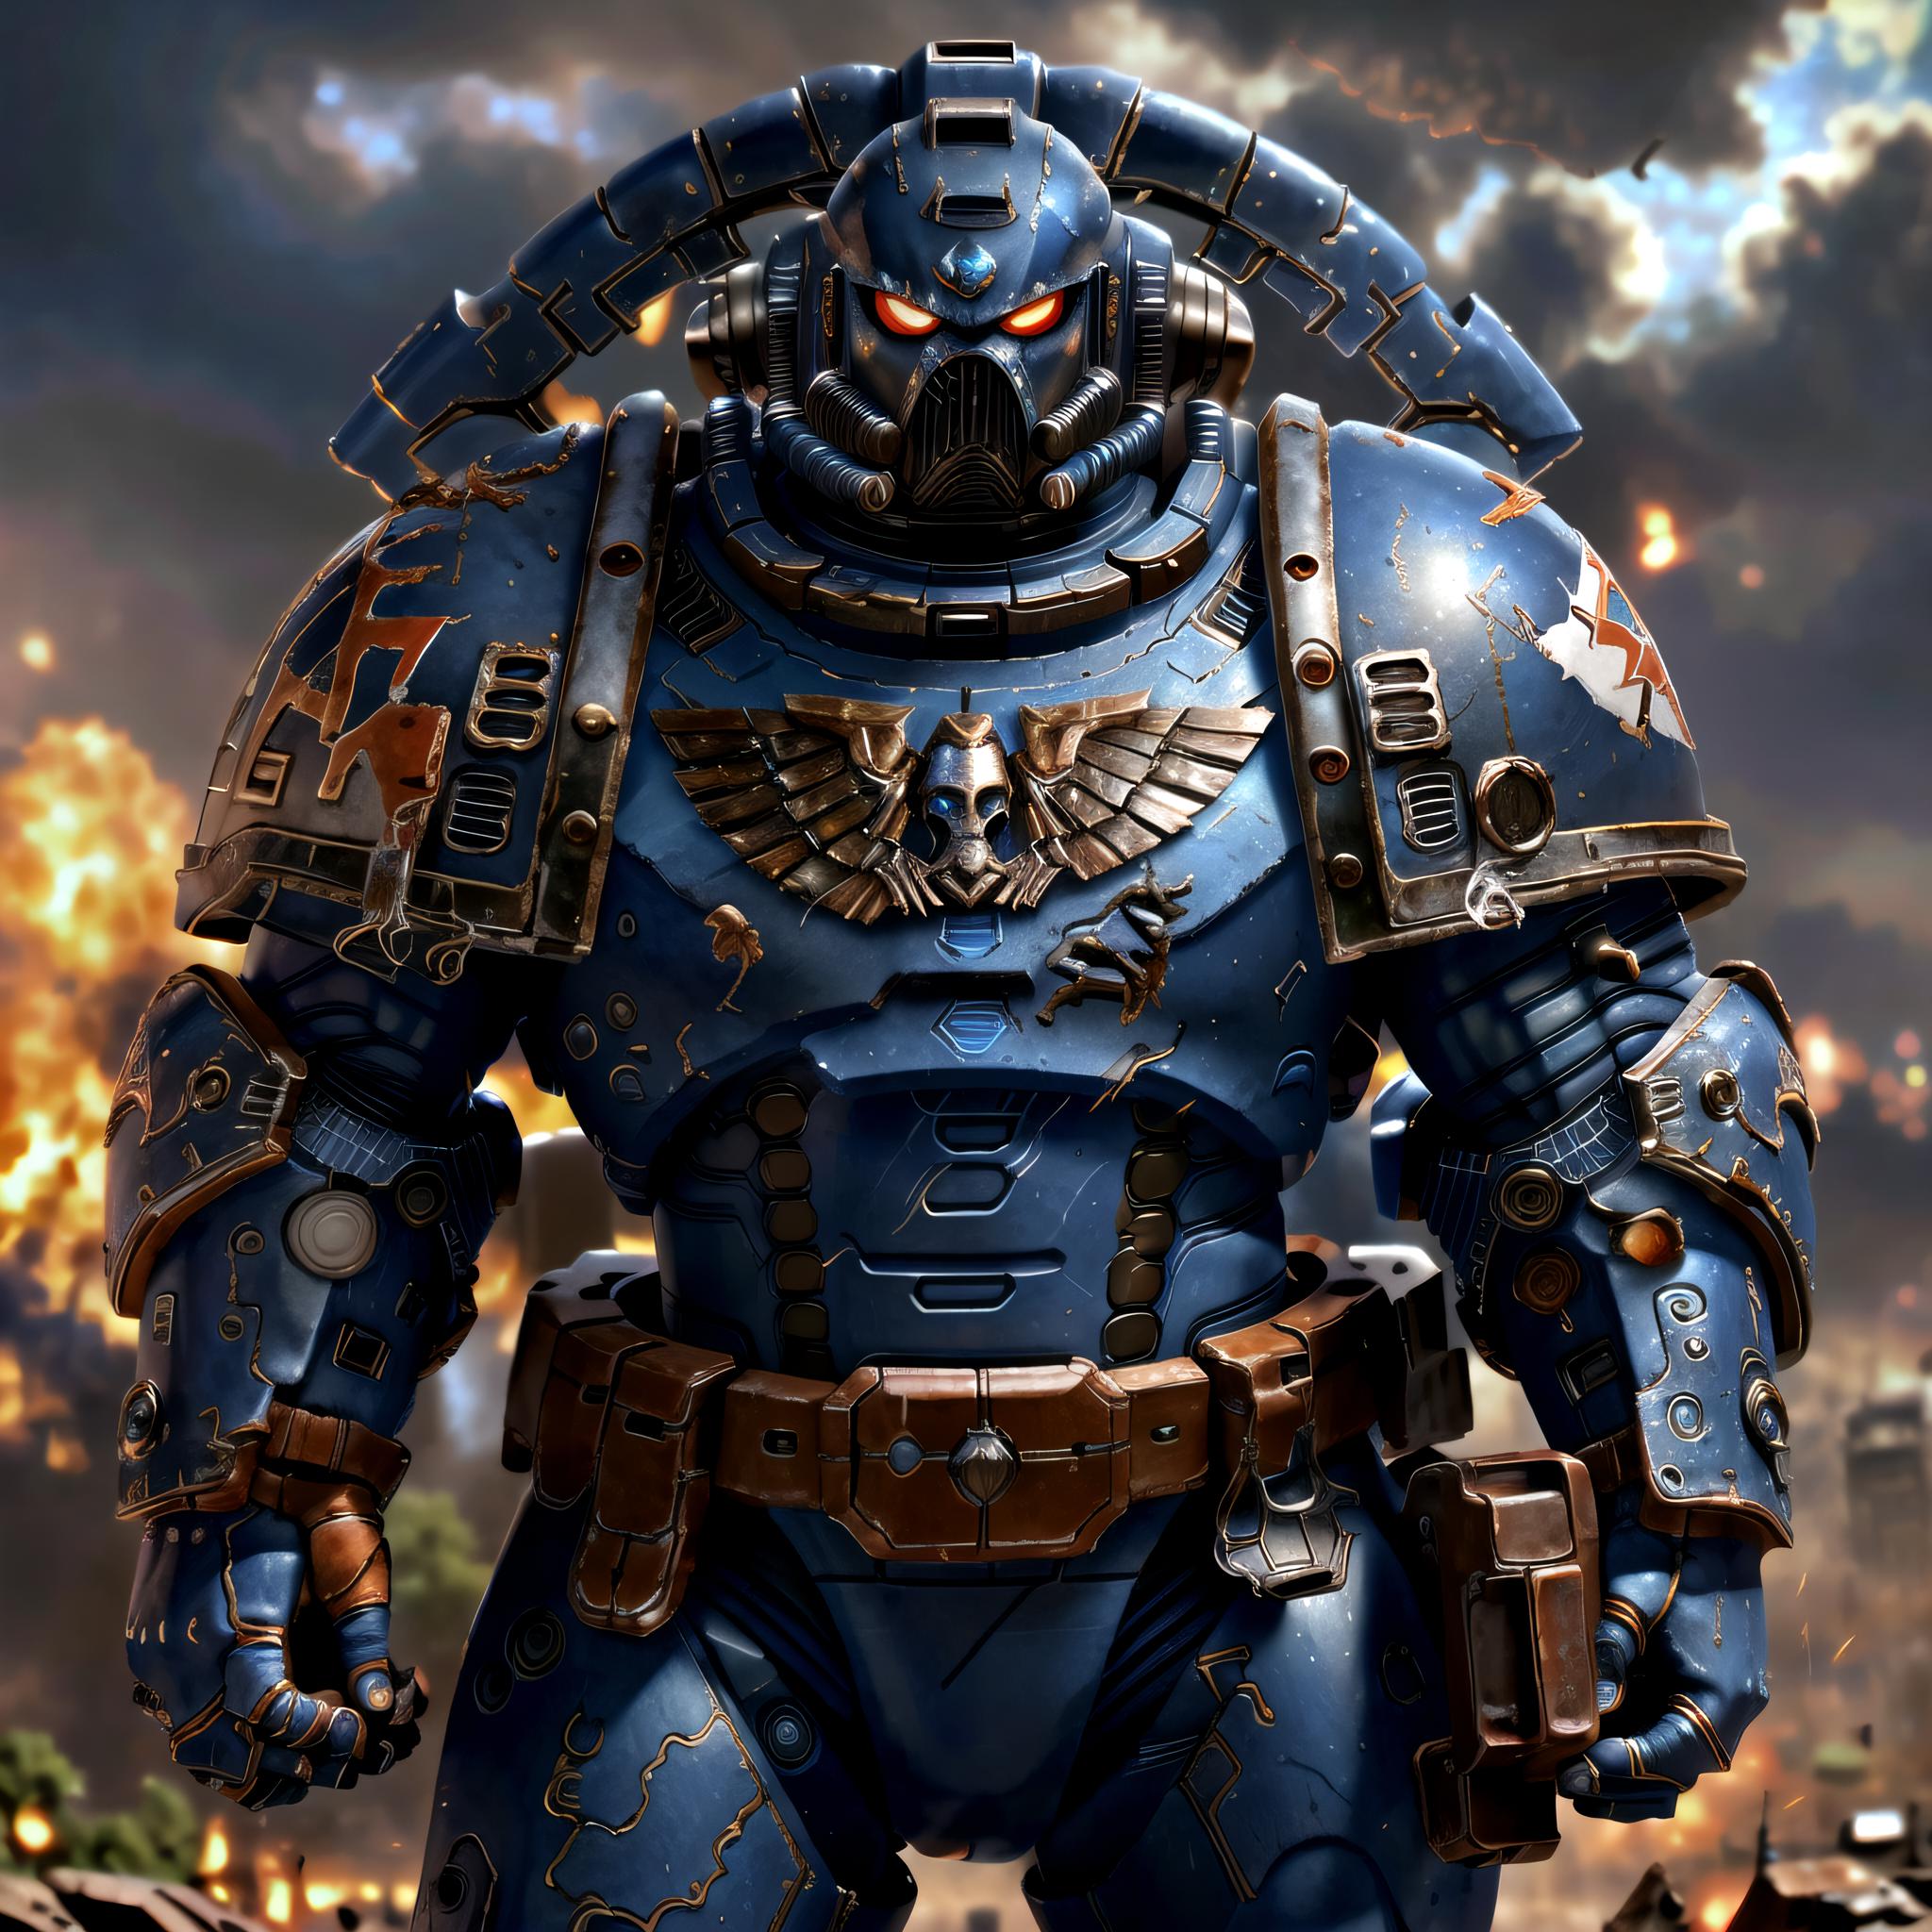 A large blue robot with wings and weapons standing in front of a city.